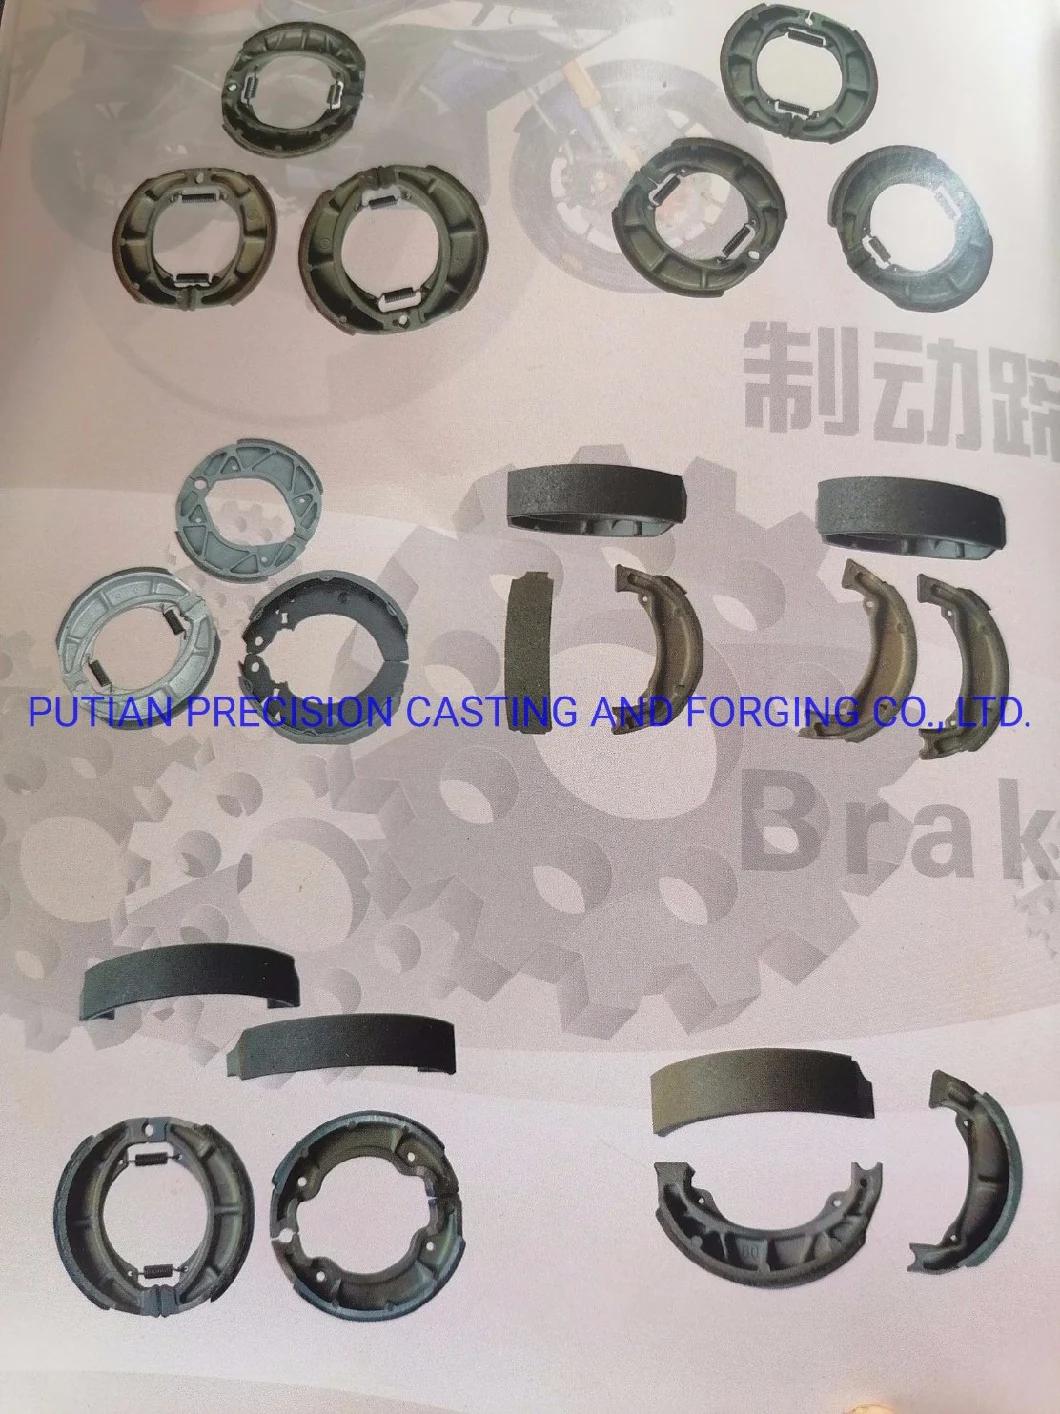 Motorcycle Brake Shoes Parts Pad for Jetta King 100, Fusdi 125, Jinan Qm125-7A, Available for Asbestos or Imitation Wuyang, Imported Dt125, Rx125, Xt200